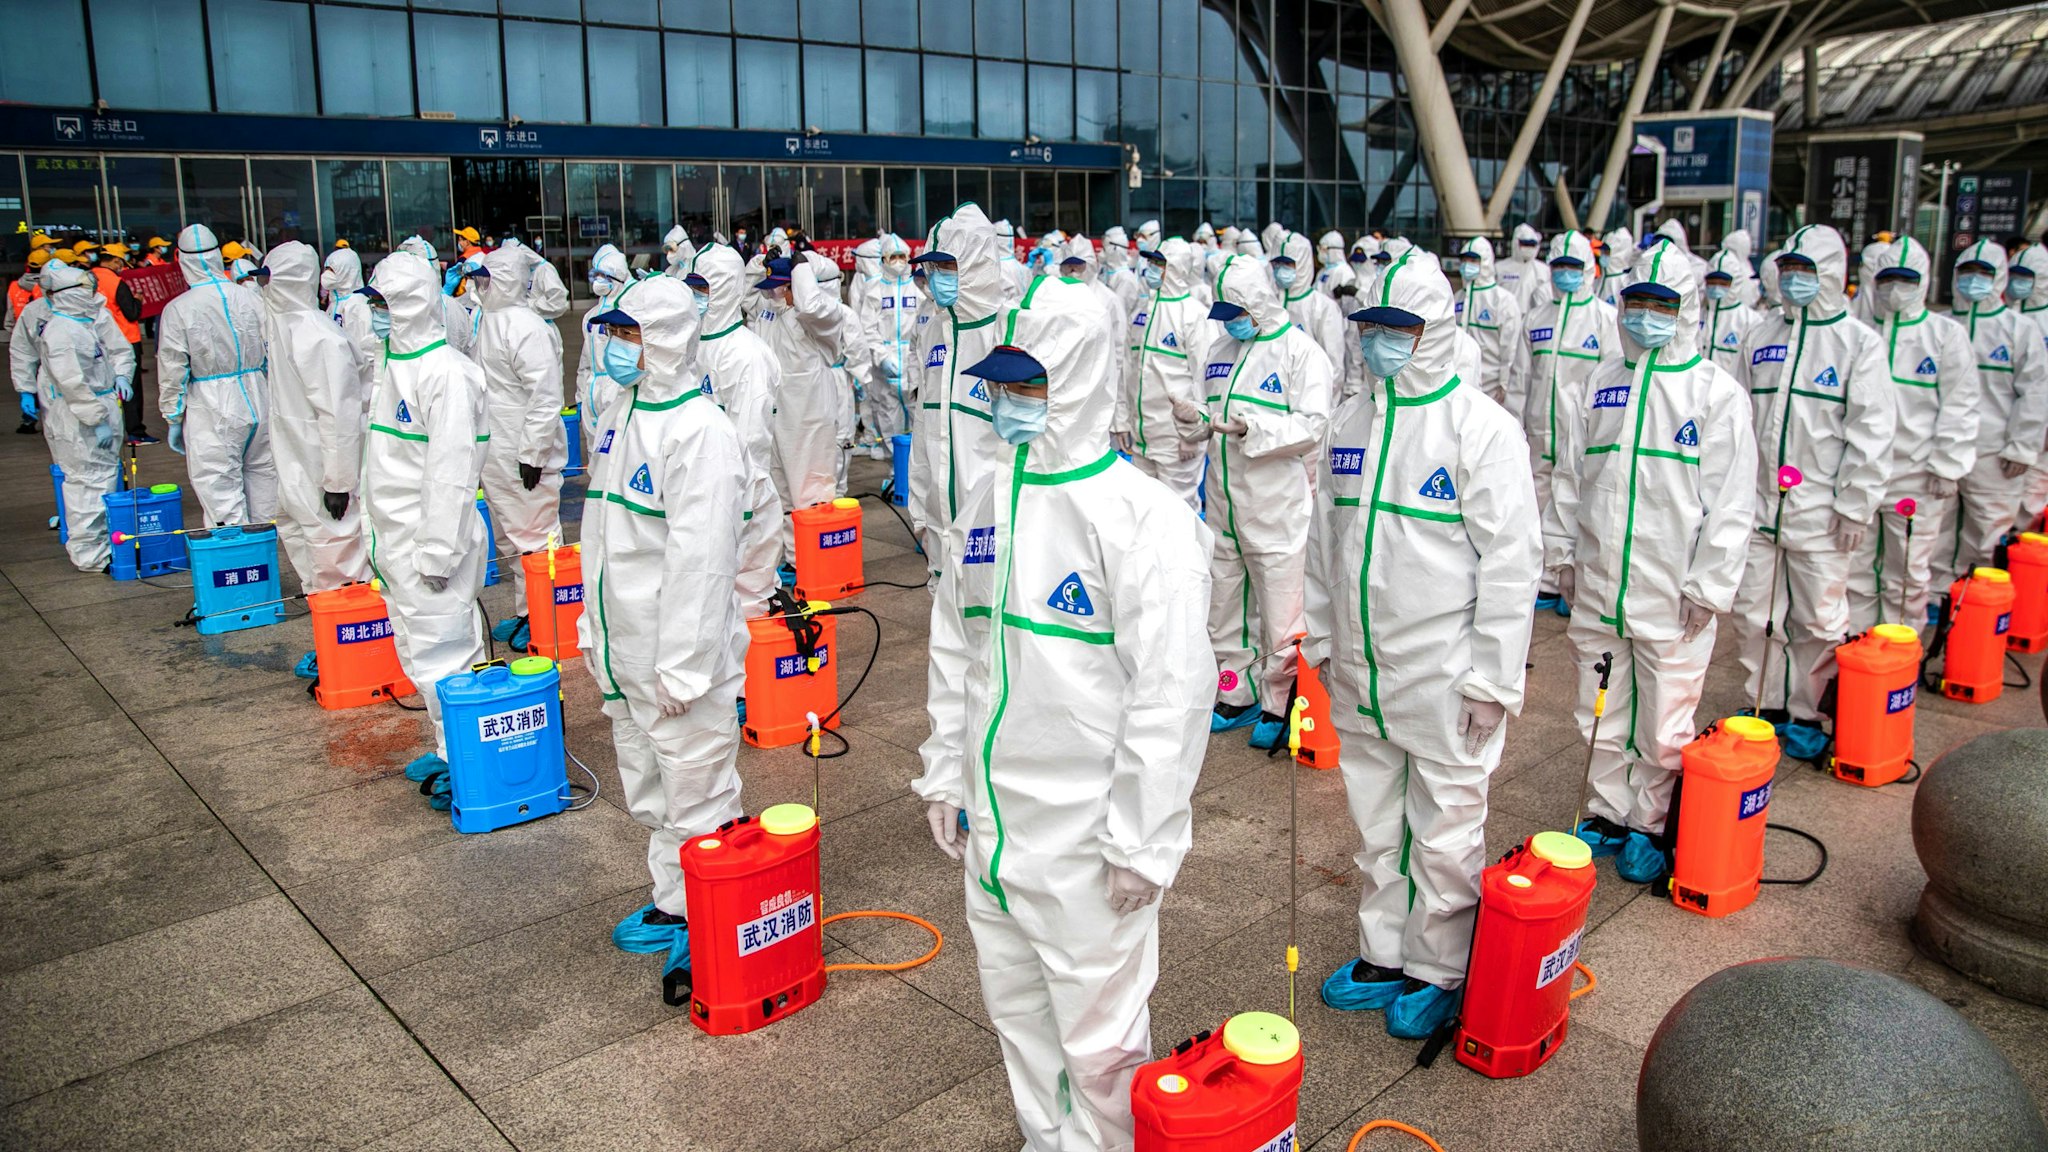 Staff members line up at attention as they prepare to spray disinfectant at Wuhan Railway Station in Wuhan in China's central Hubei province on March 24, 2020. - China announced on March 24 that a lockdown would be lifted on more than 50 million people in central Hubei province where the COVID-19 coronavirus first emerged late last year.